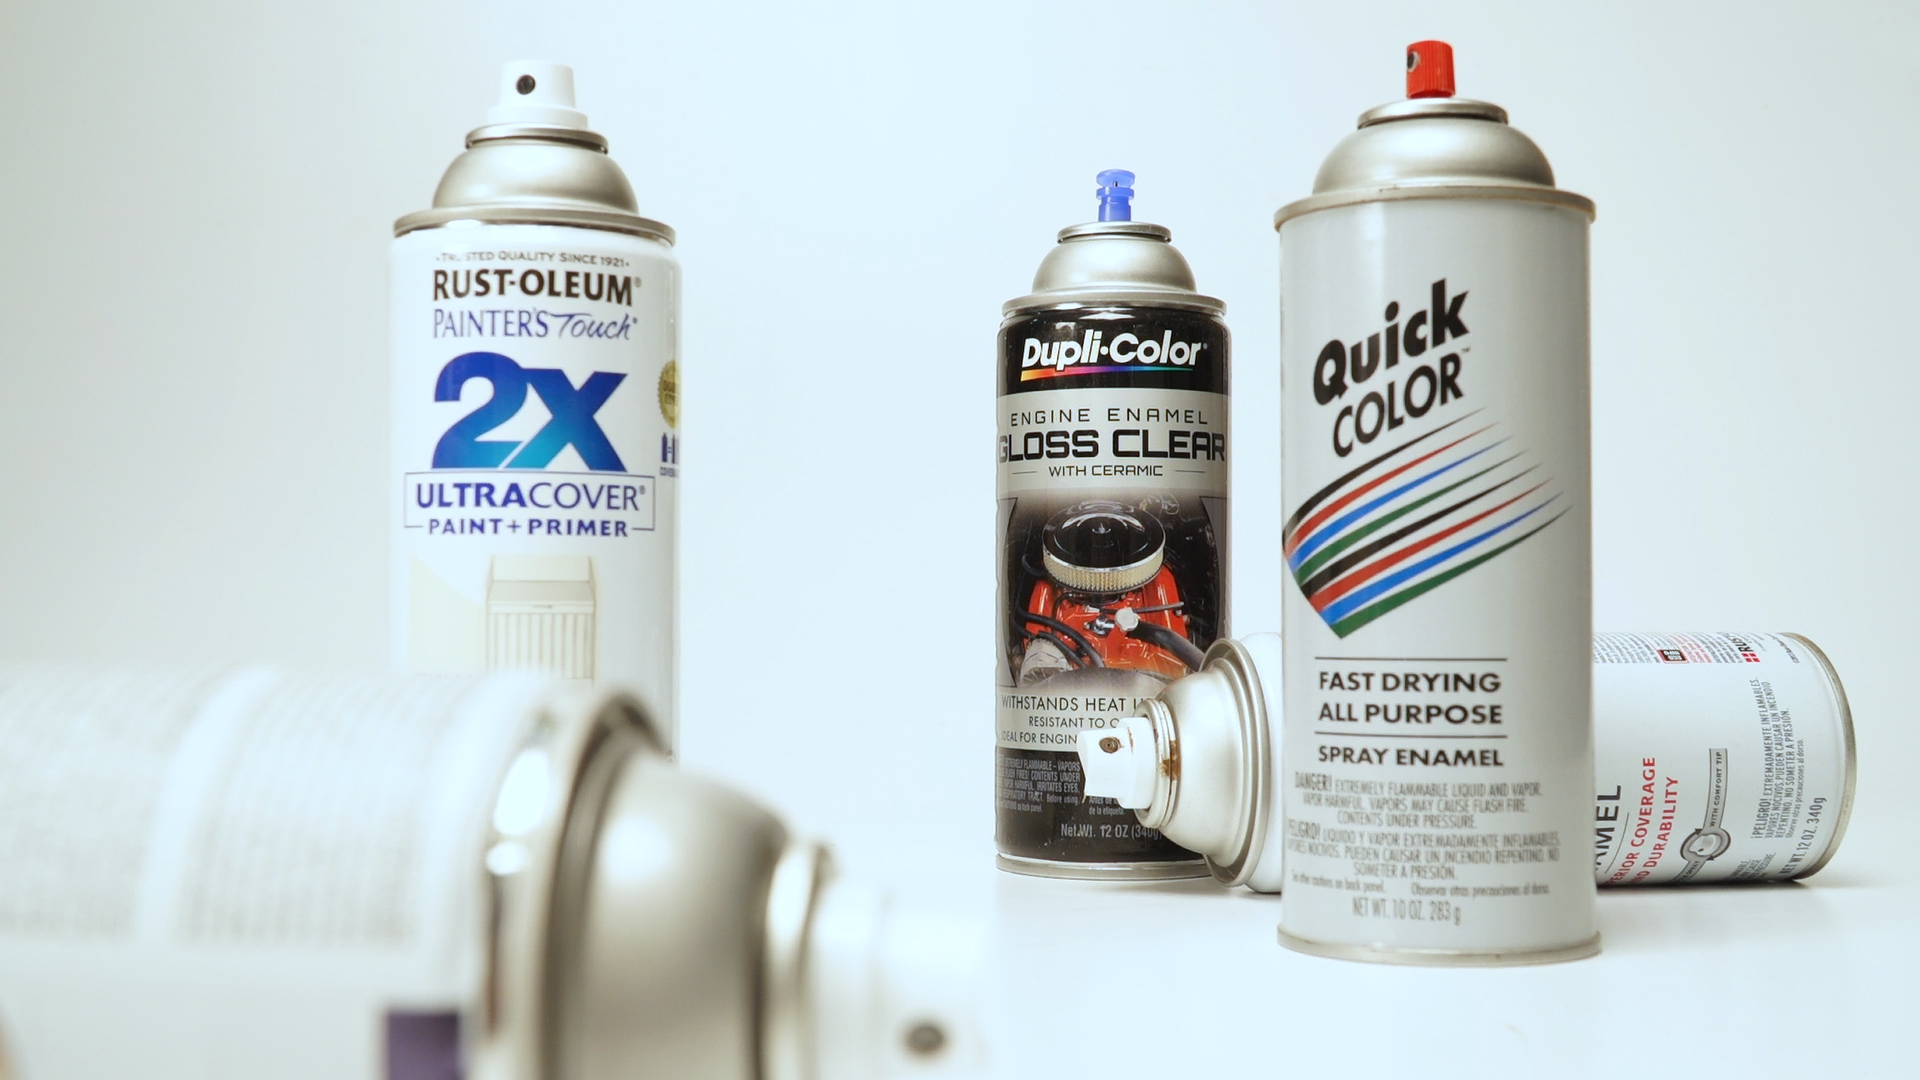 COLORBOND Vinyl, Leather & Plastic Spray Paint-CLEARANCE PRICED